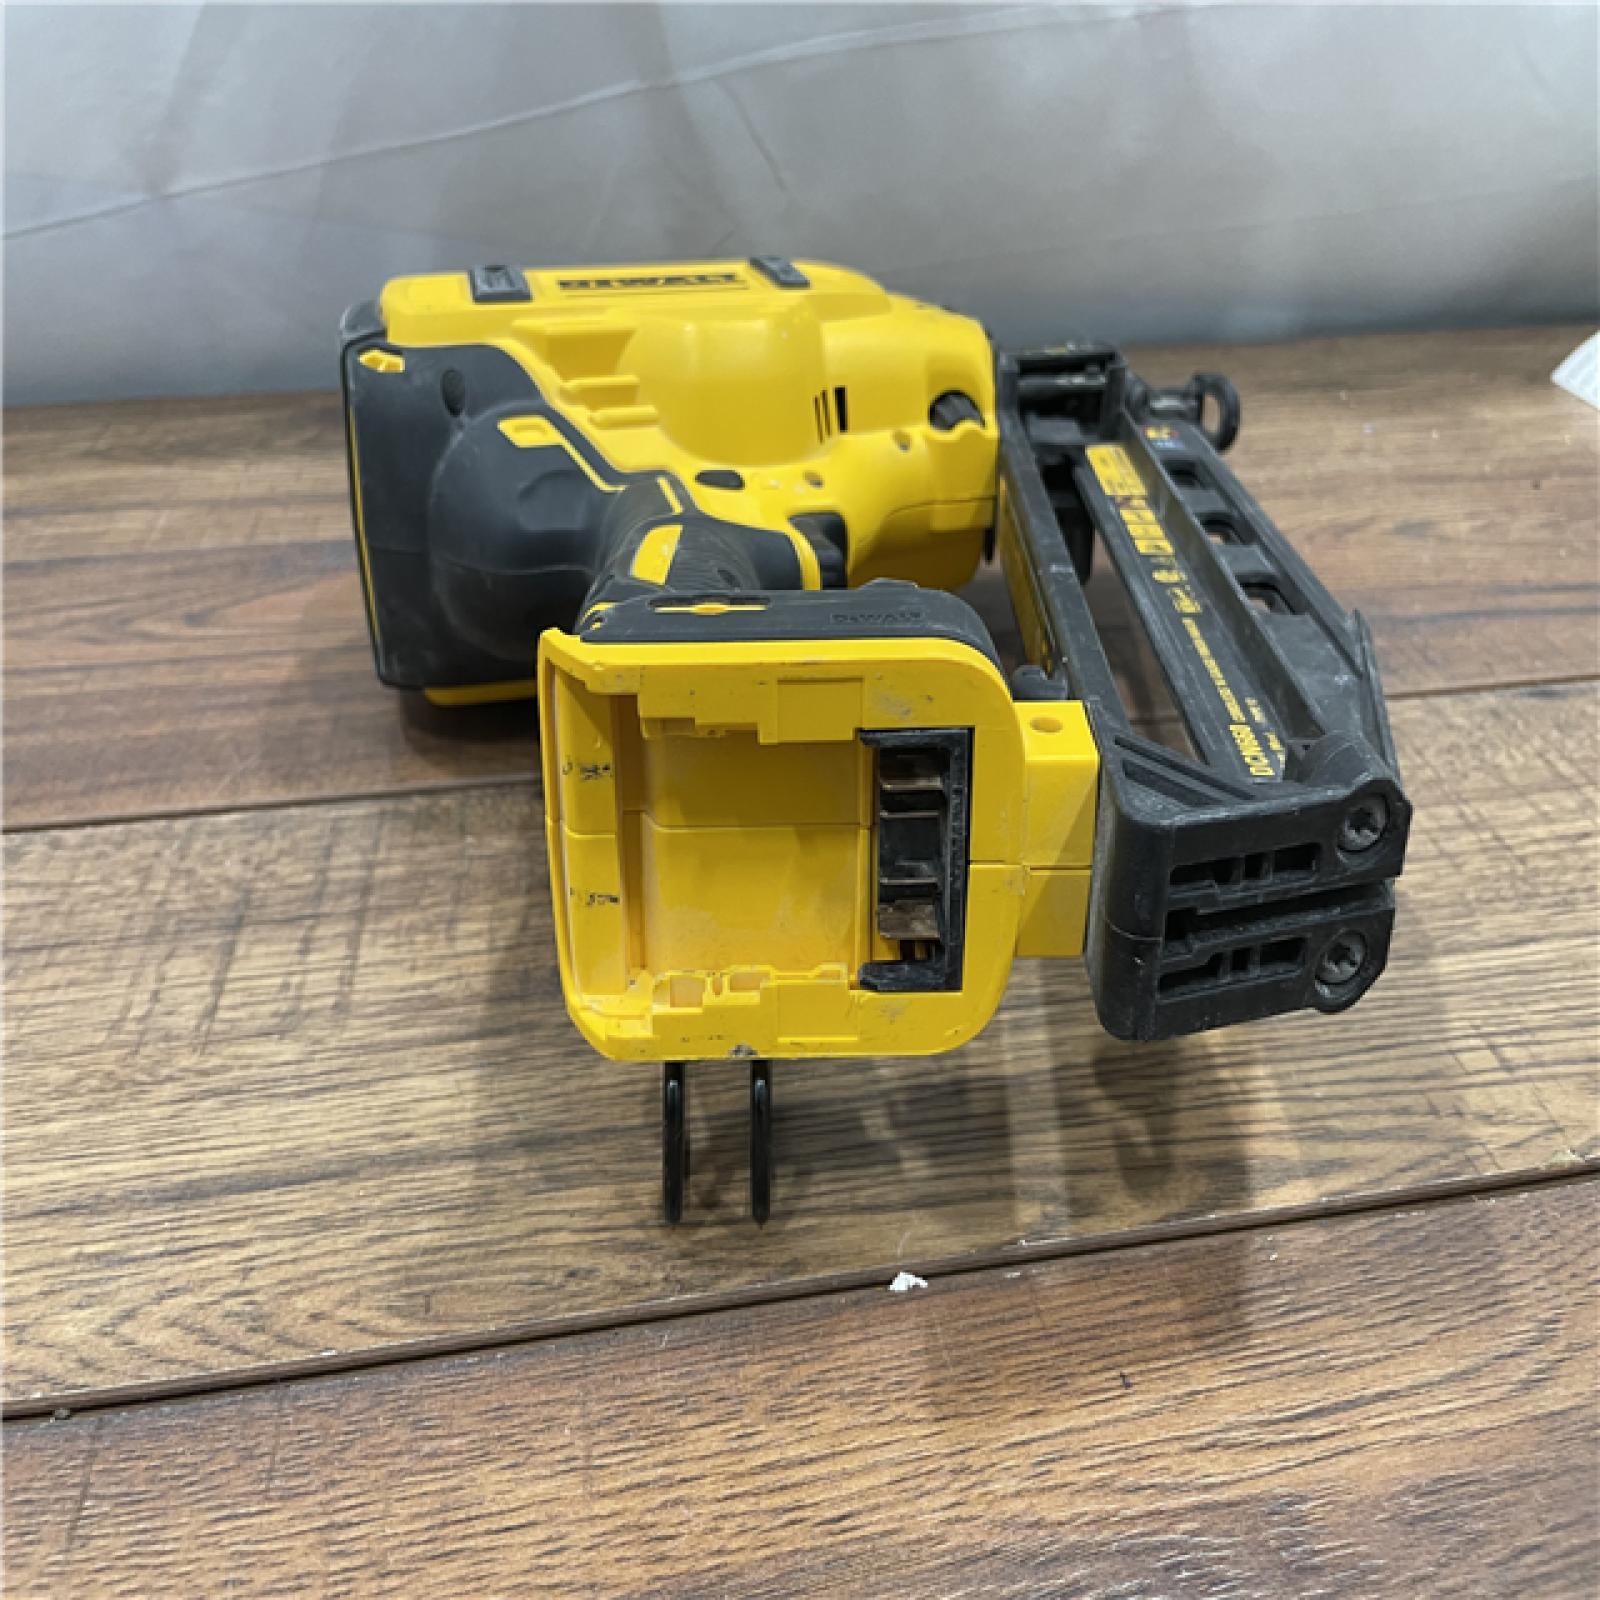 AS-IS DEWALT Cordless 20V Max XR Angled Finish Nailer (Tool Only)